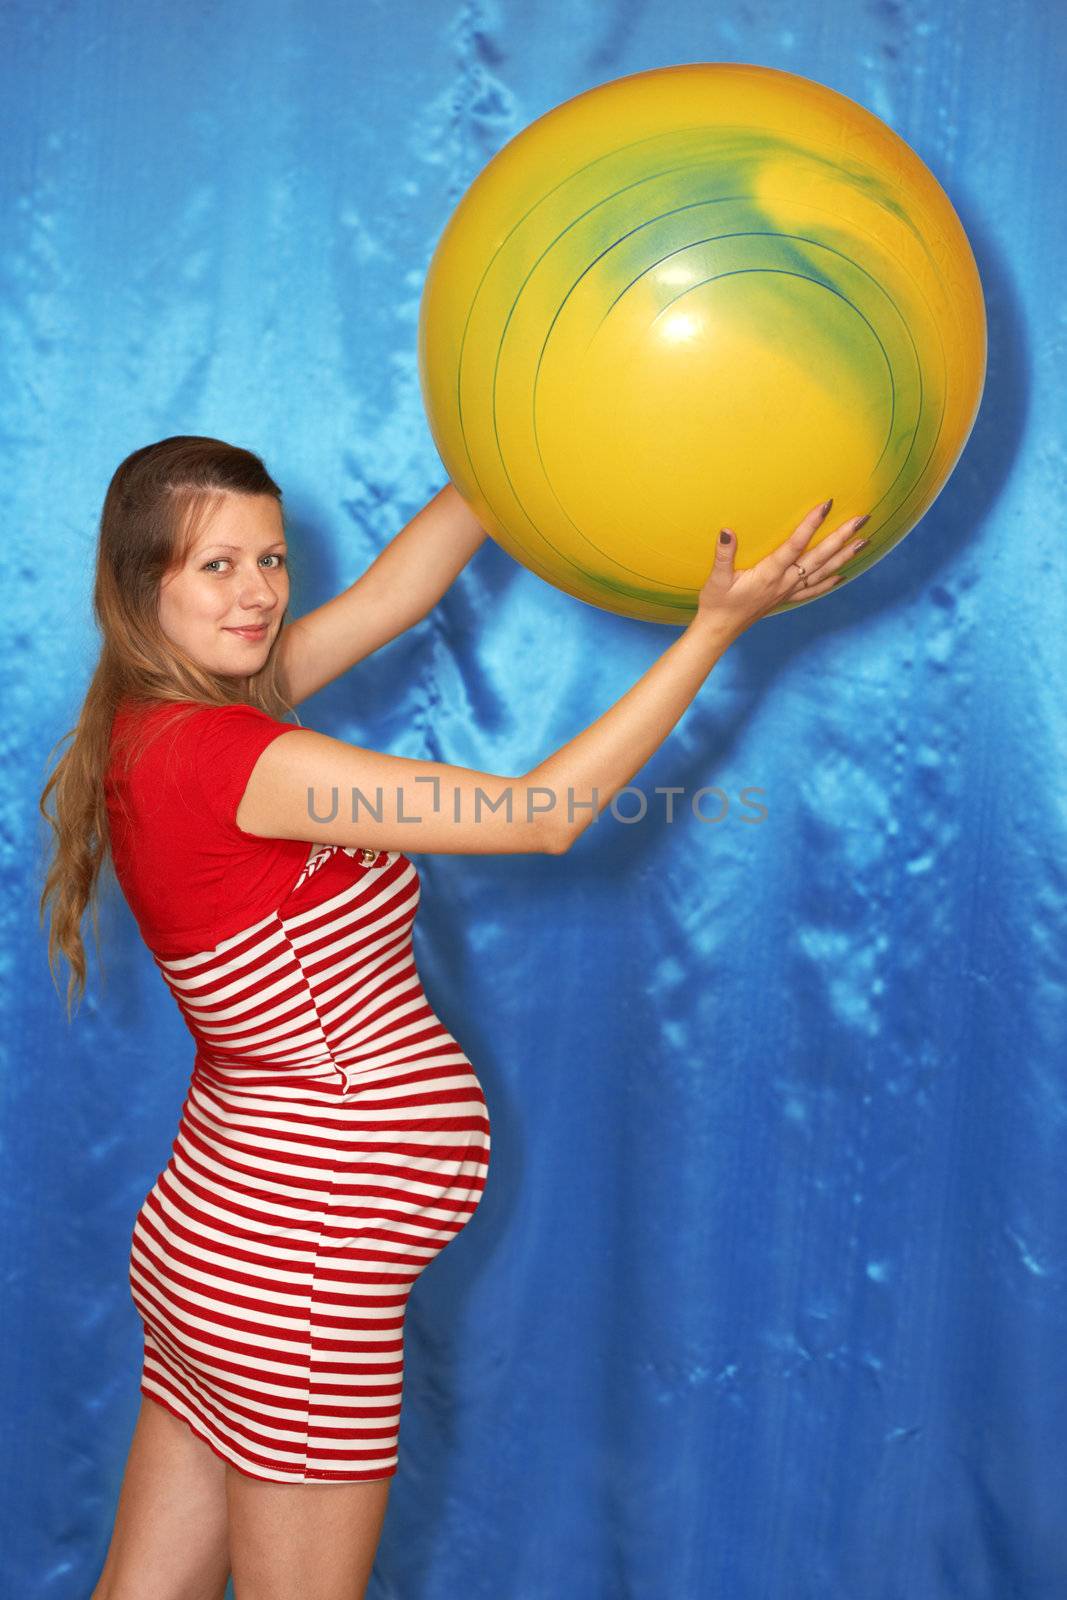 A pregnant woman and yellow ball on a blue background